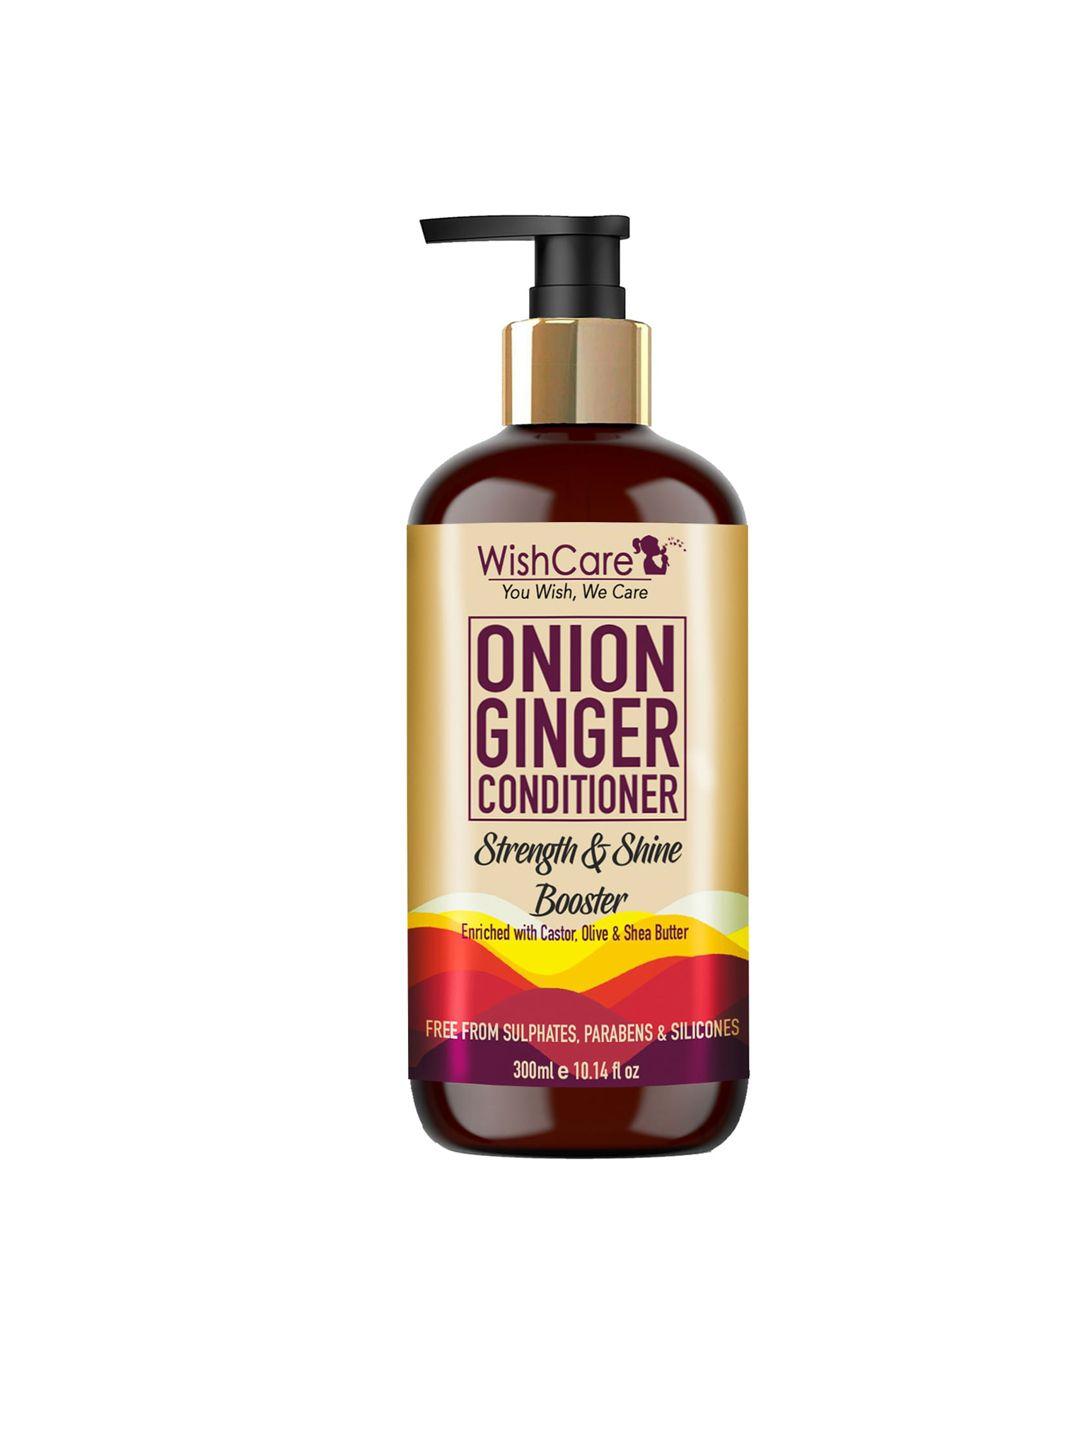 wishcare onion ginger conditioner - strength & shine booster